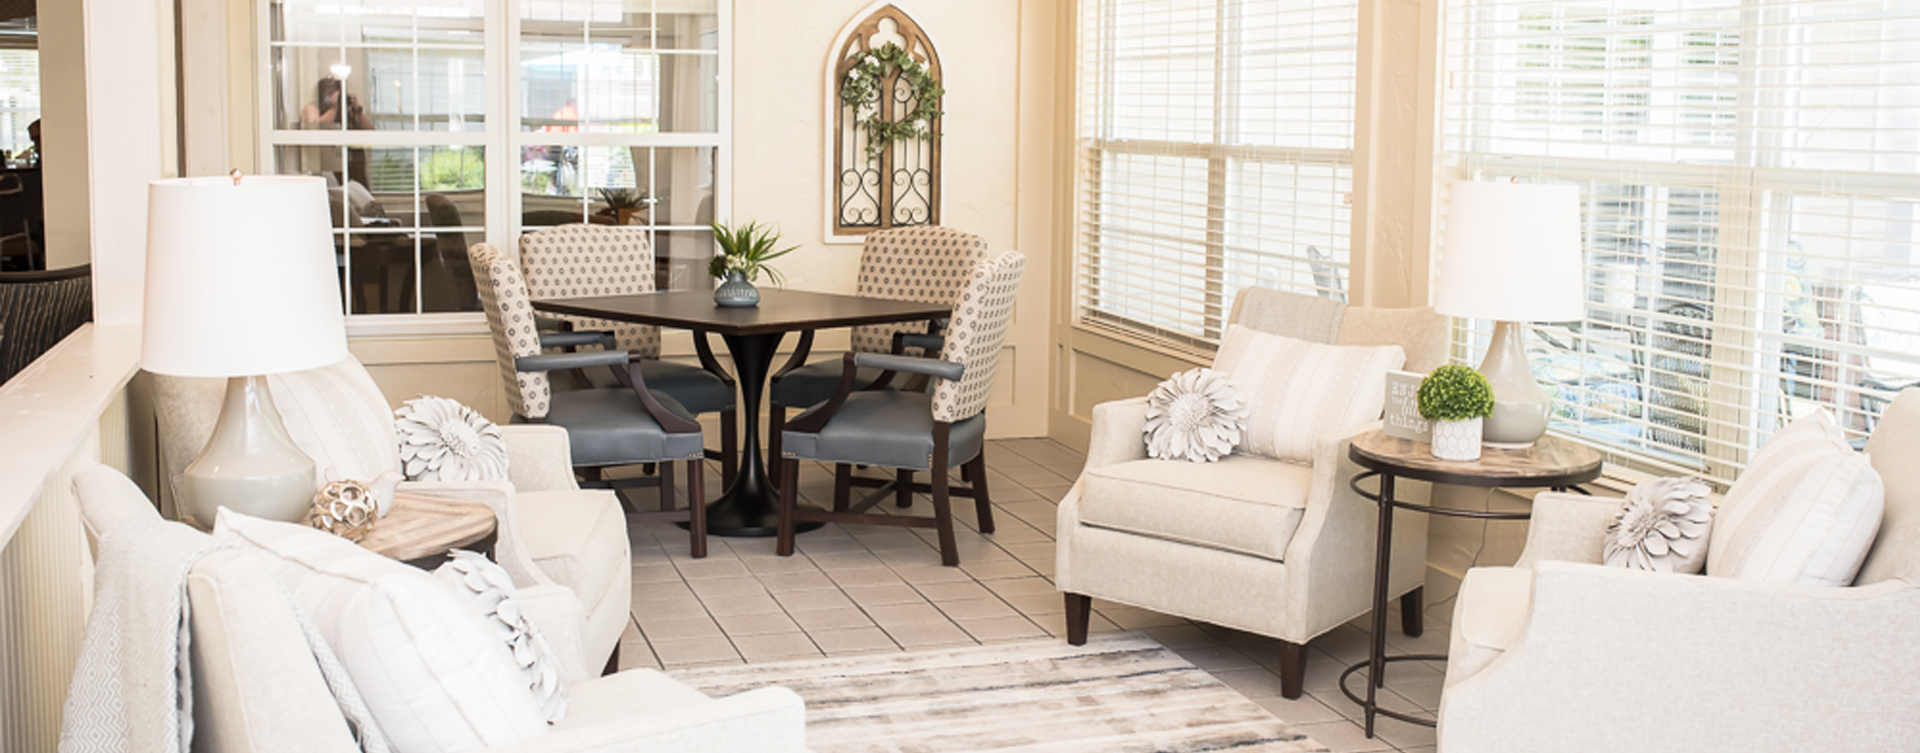 Relax in the warmth of the sunroom at Bickford of Sioux City